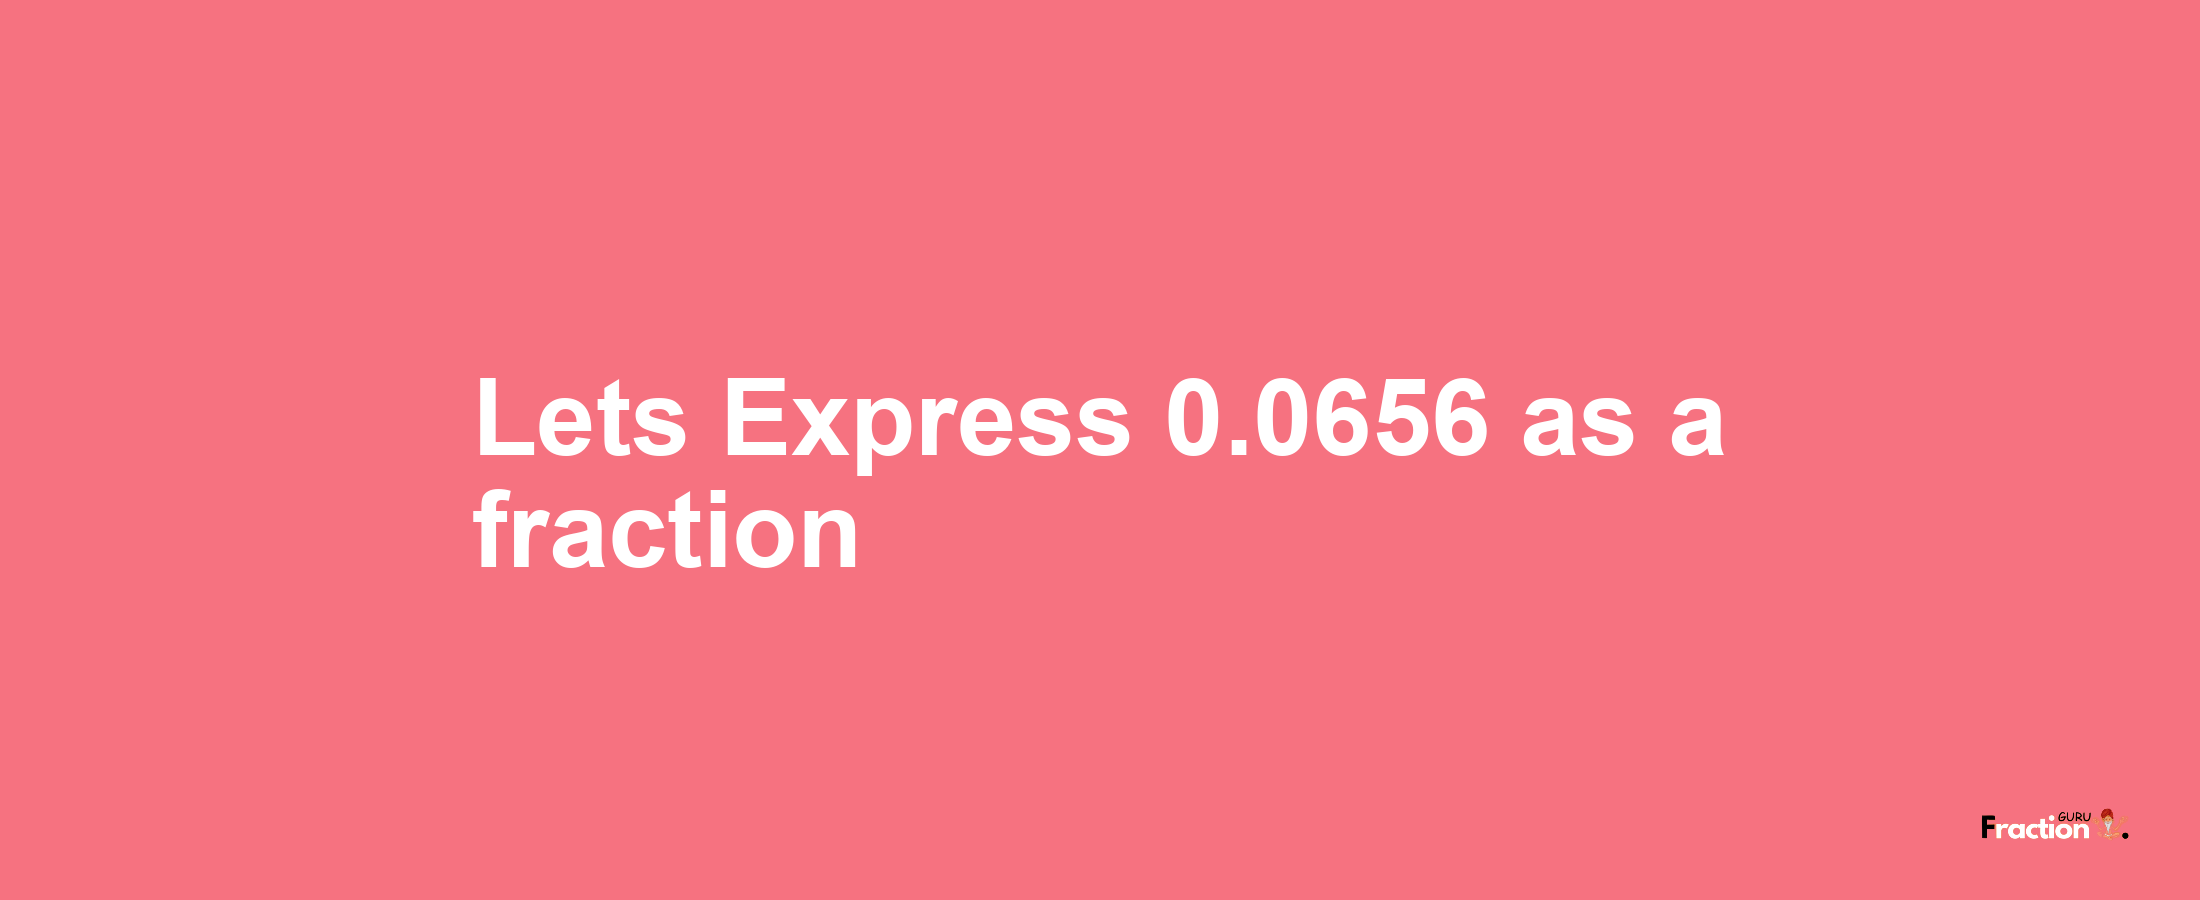 Lets Express 0.0656 as afraction